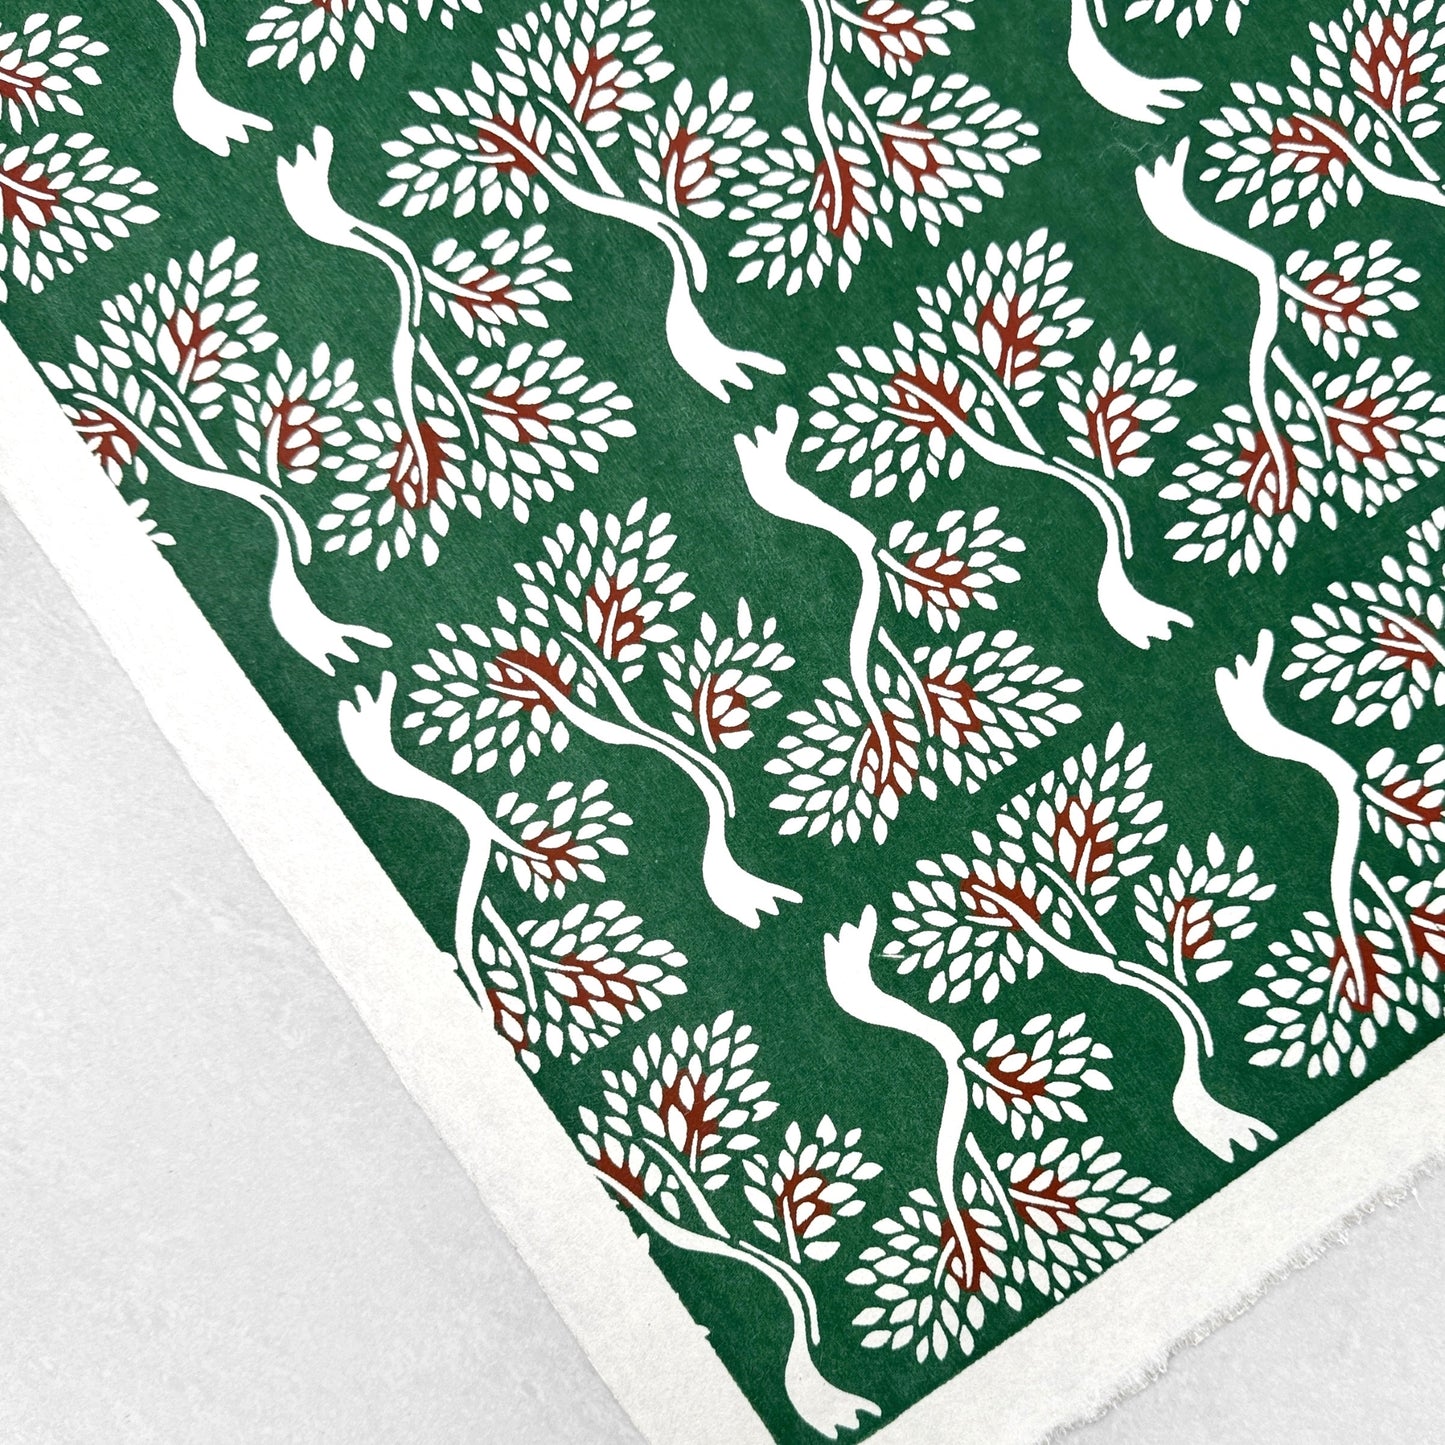 A Japanese stencil-dyed patterned paper in dark green with a repeat pattern of white bonsai trees. Flat shot